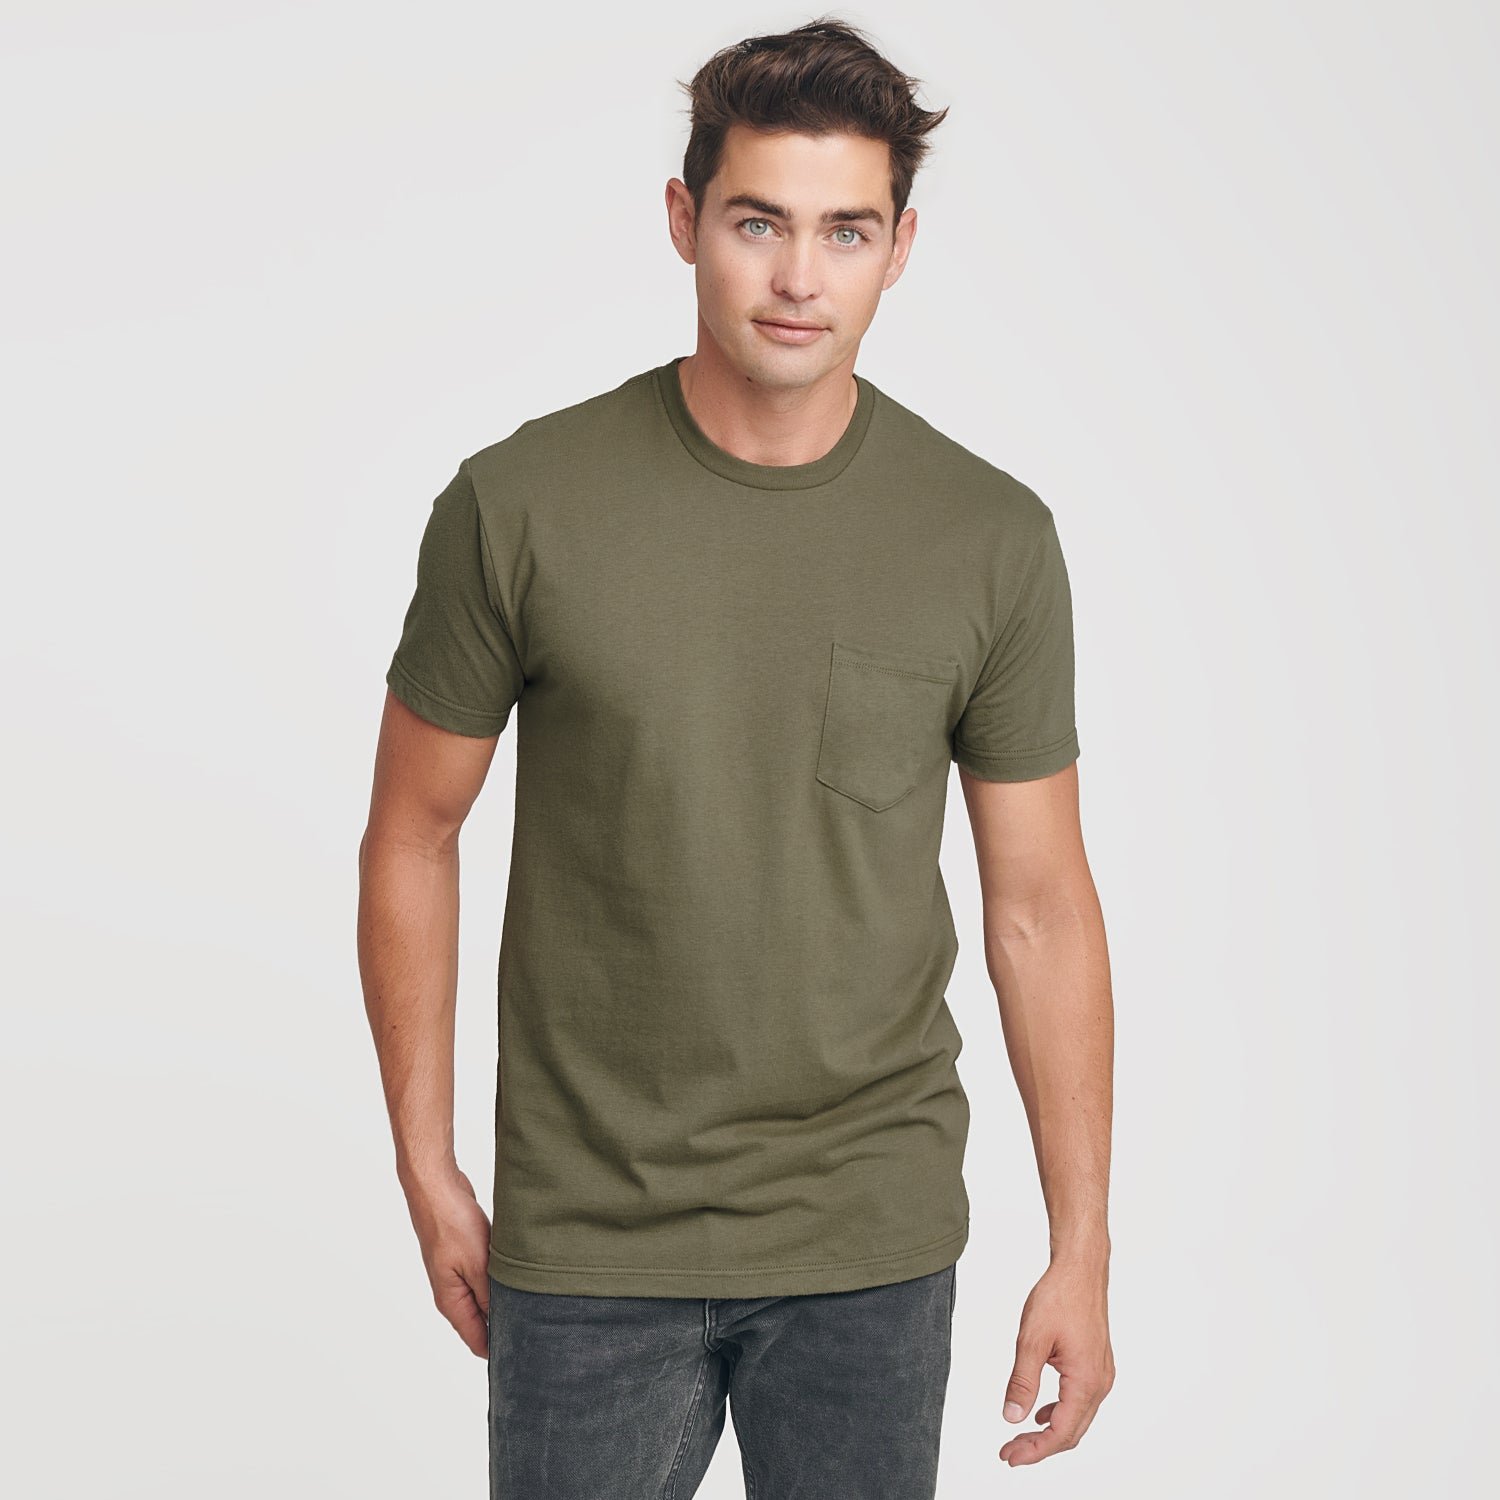 The Pocket Tee Color 3-Pack